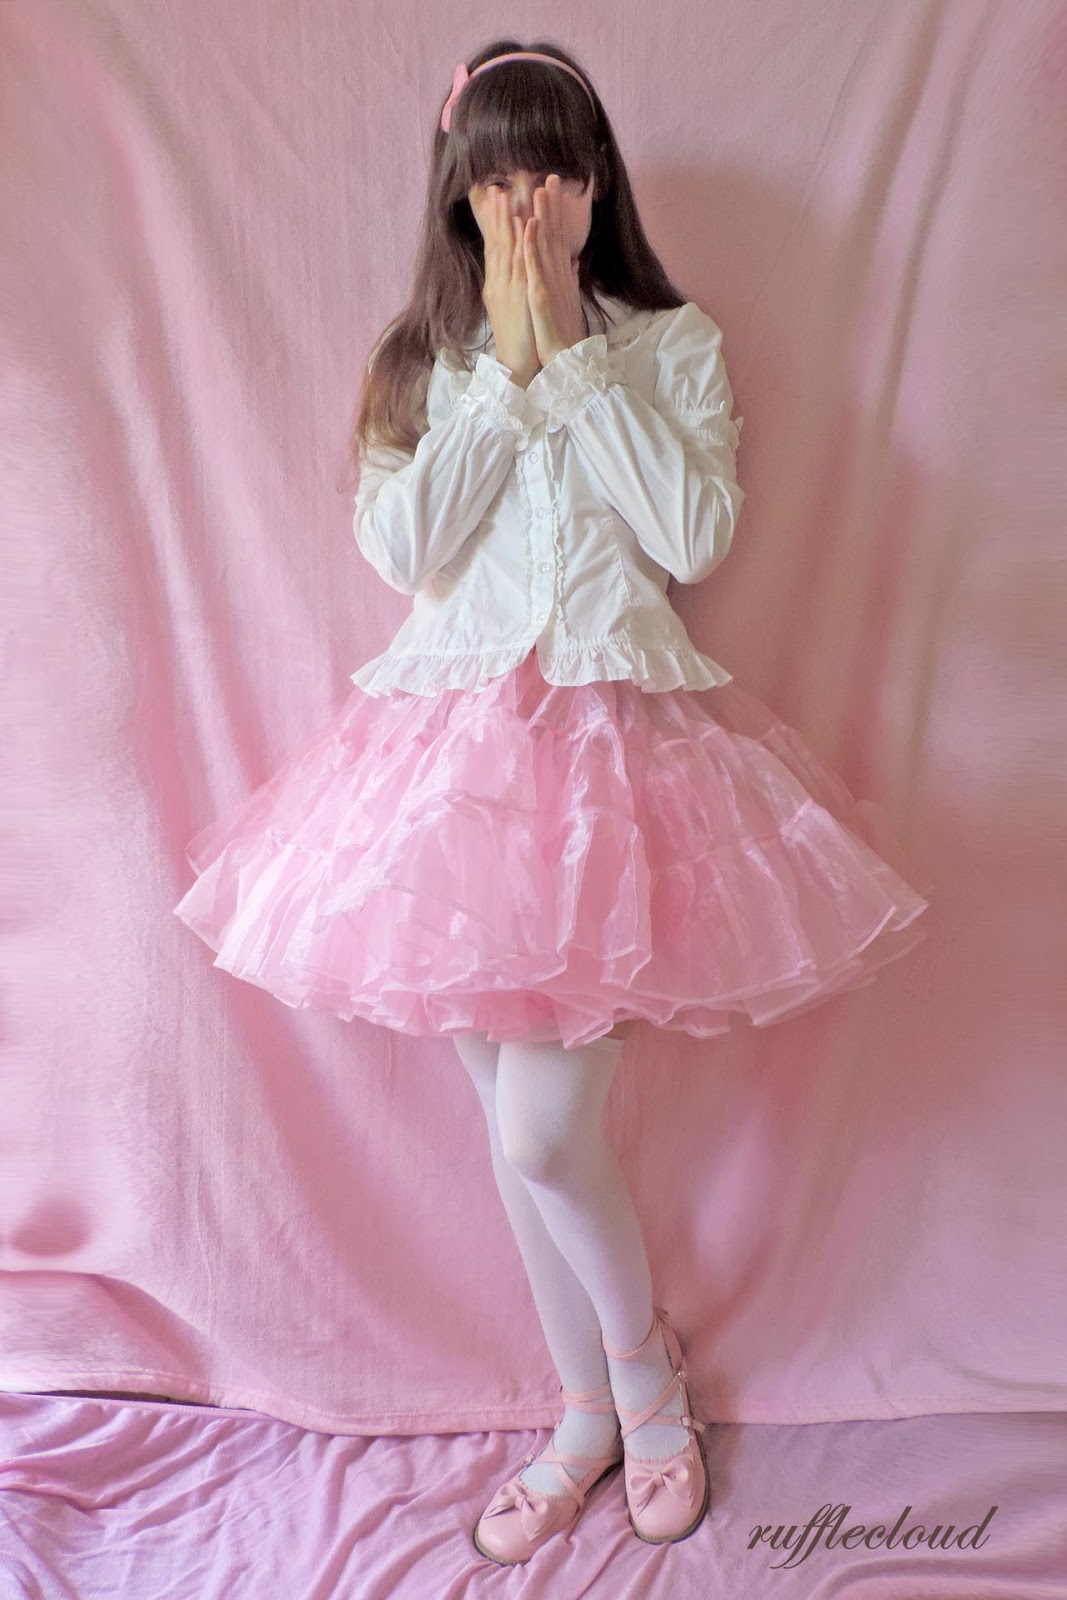 Petticoat Outfits